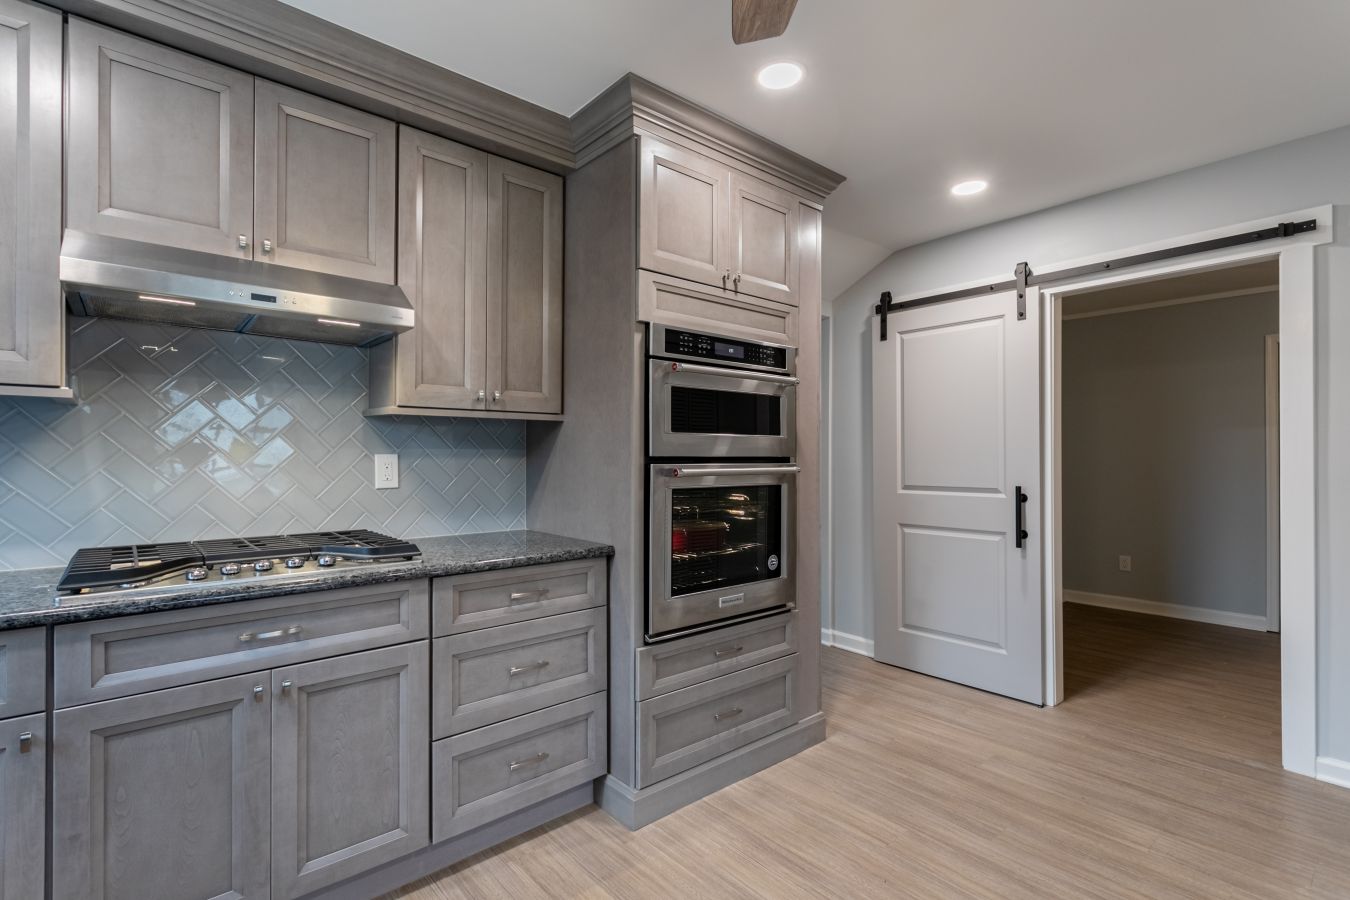 Kitchen with center island and gray cabinets from amiano and son